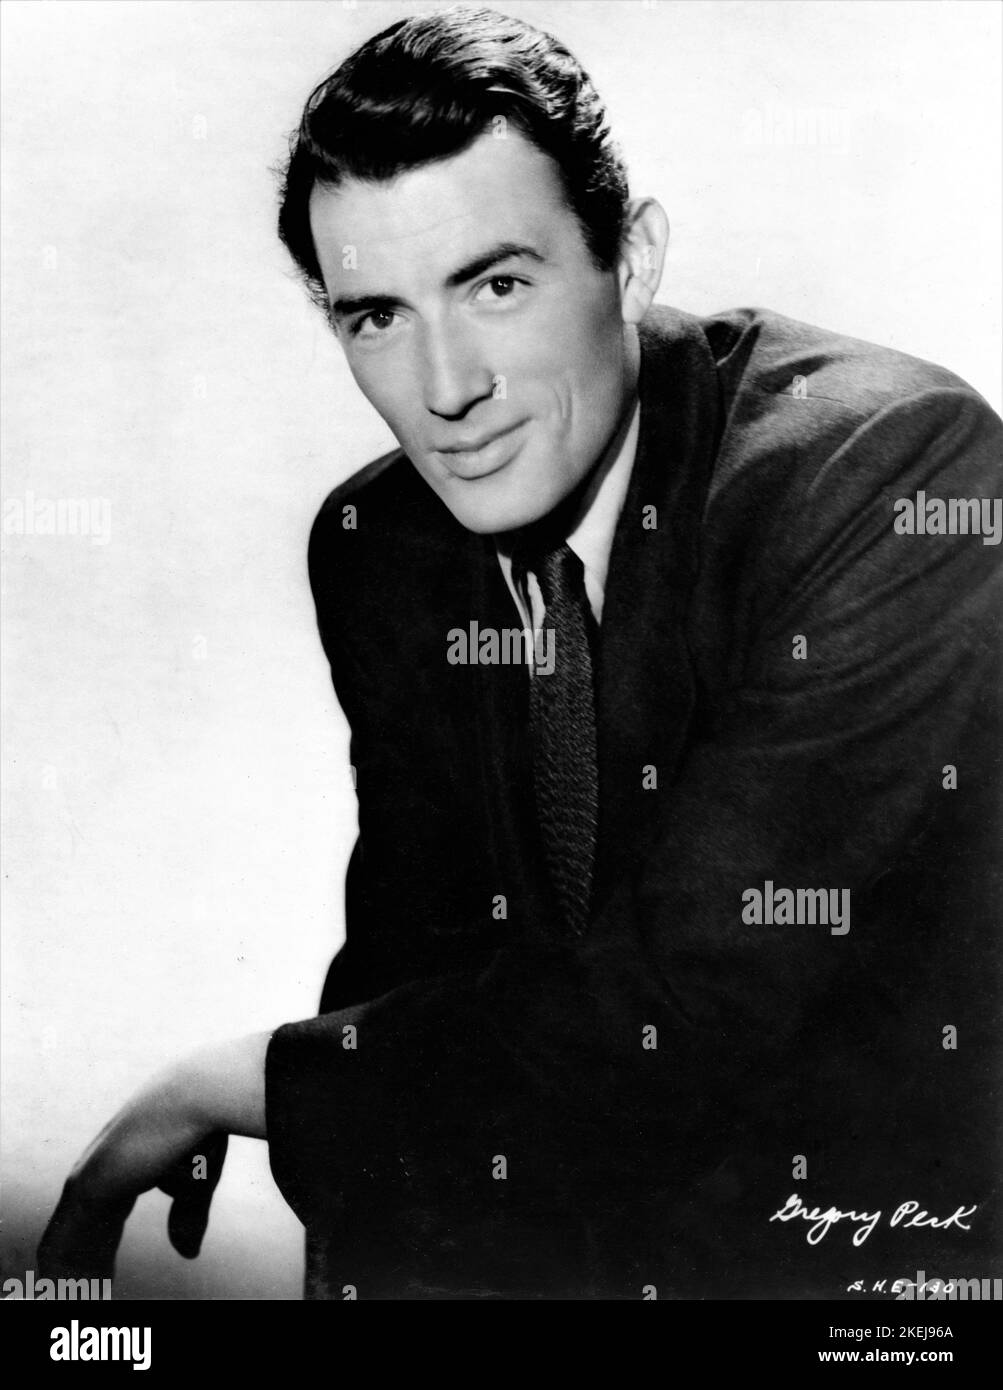 GREGORY PECK 1944 Portrait publicity for SPELLBOUND 1945 director ALFRED HITCHCOCK Selznick International Pictures / Vanguard Films / United Artists Stock Photo